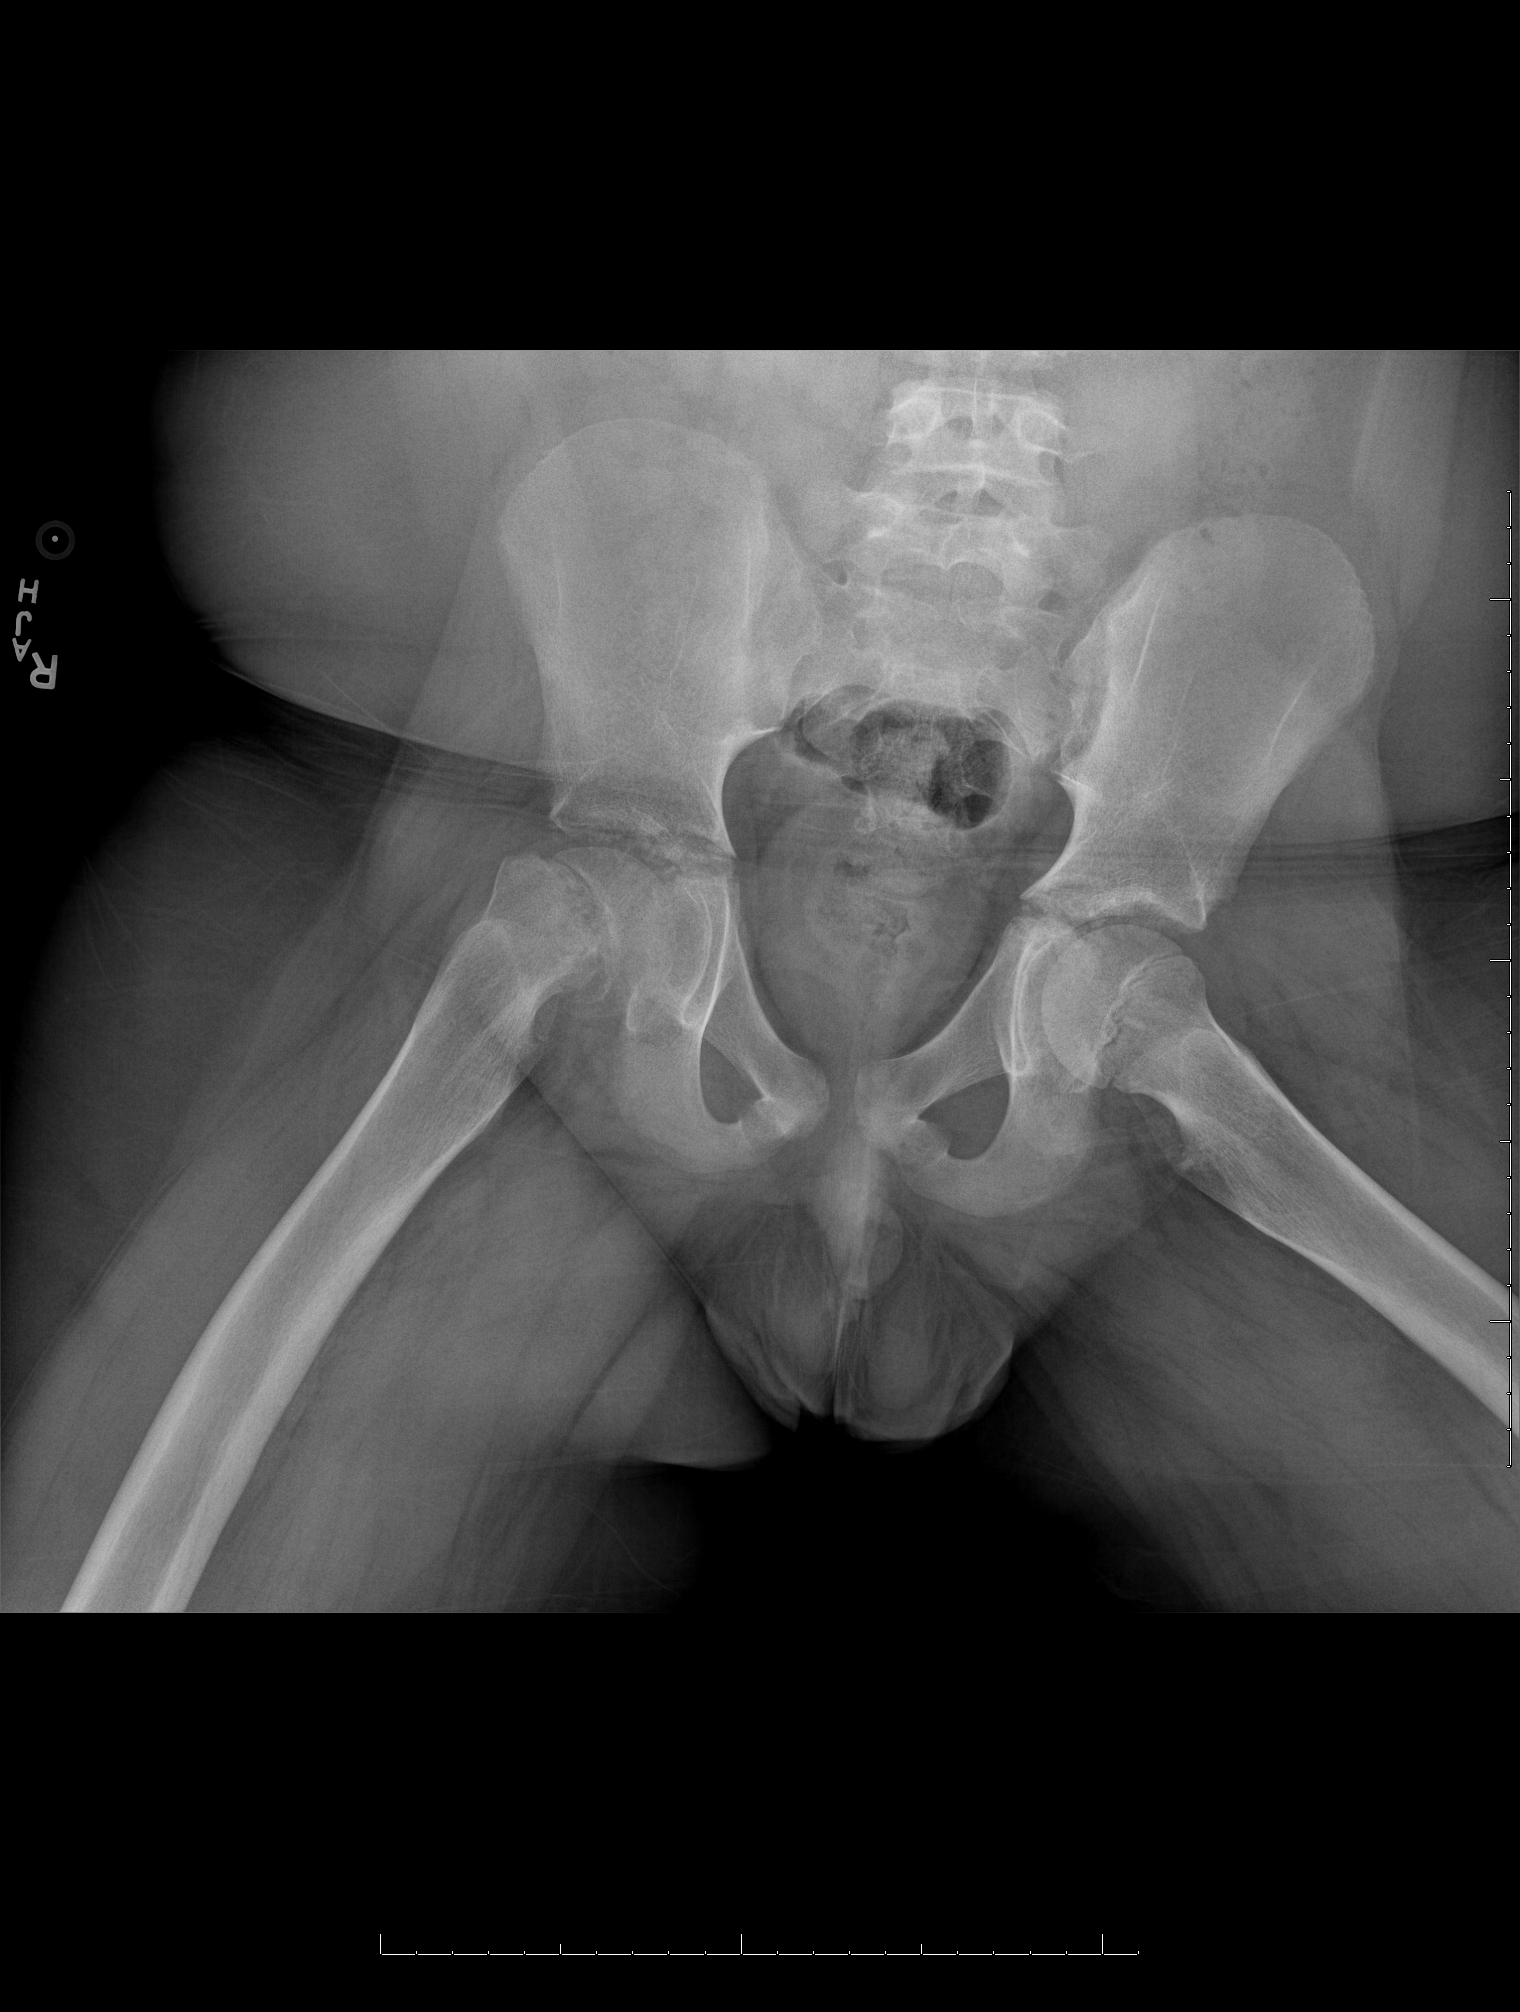 Frog leg view of the pelvis showing a right slipped capital femoral epiphysis which is a Salter-Harris type I injury